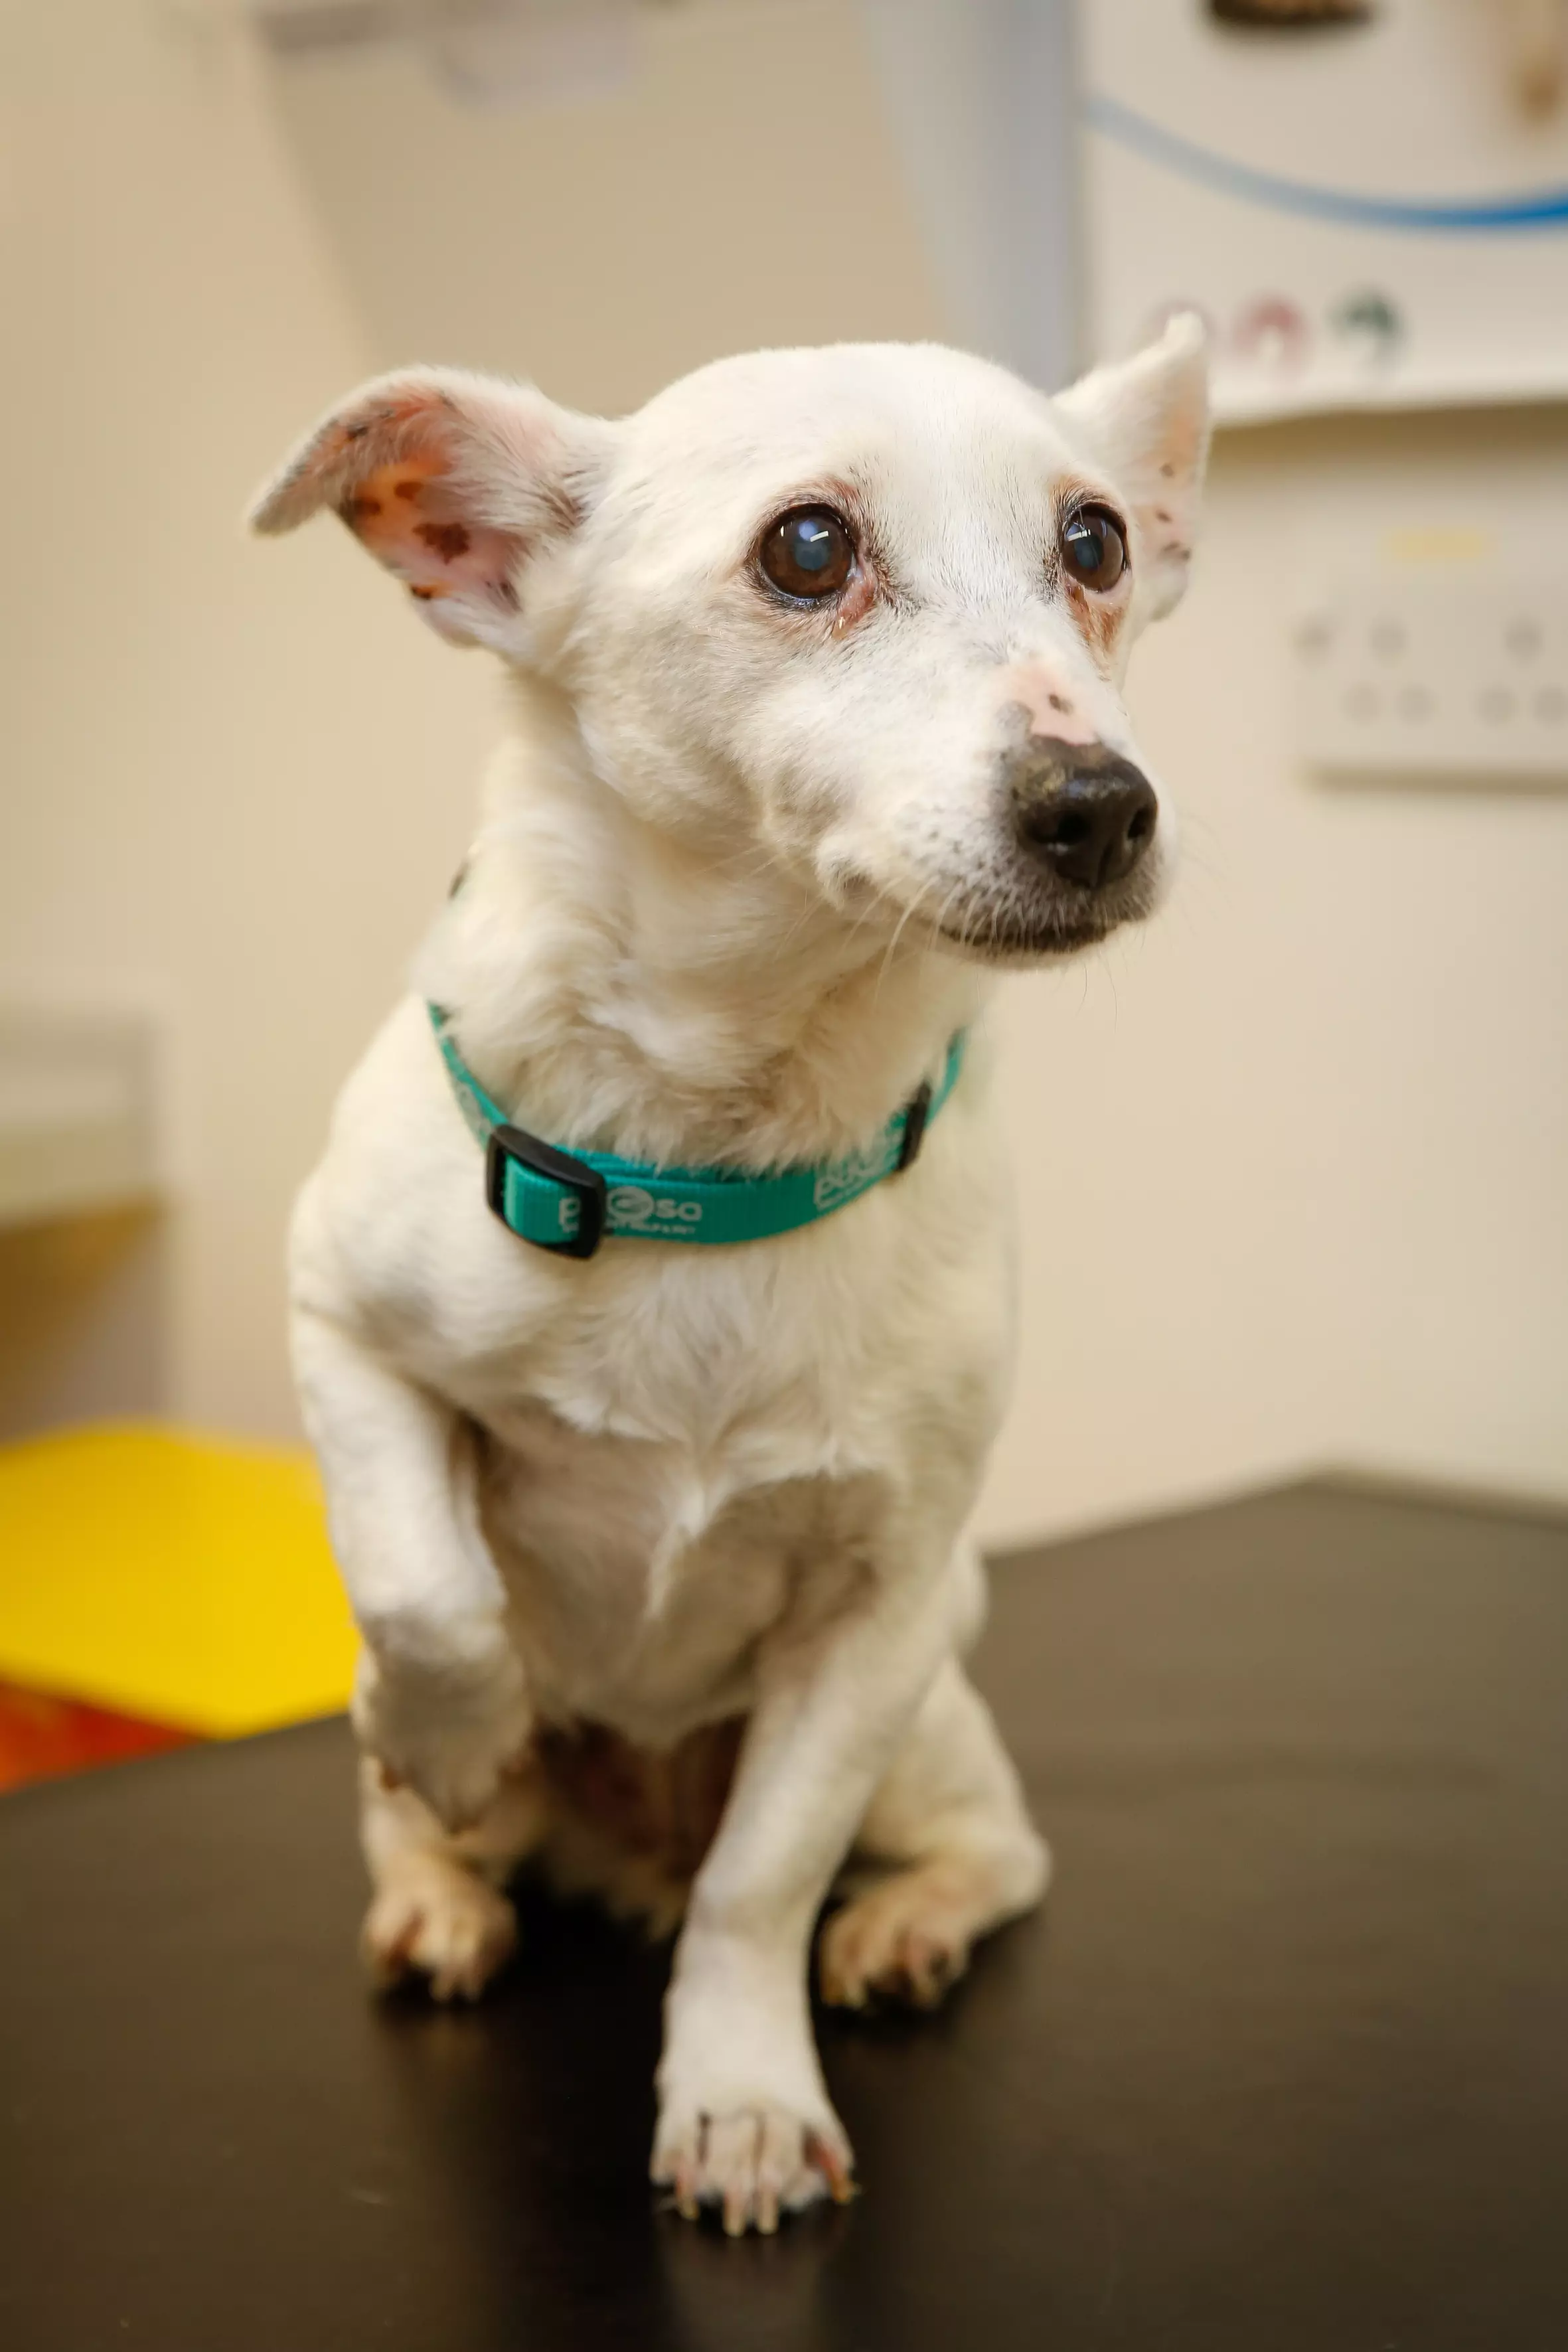 Sweet-toothed Lily was rushed to PDSA vets for emergency treatment after she gobbled chocolate Santas (